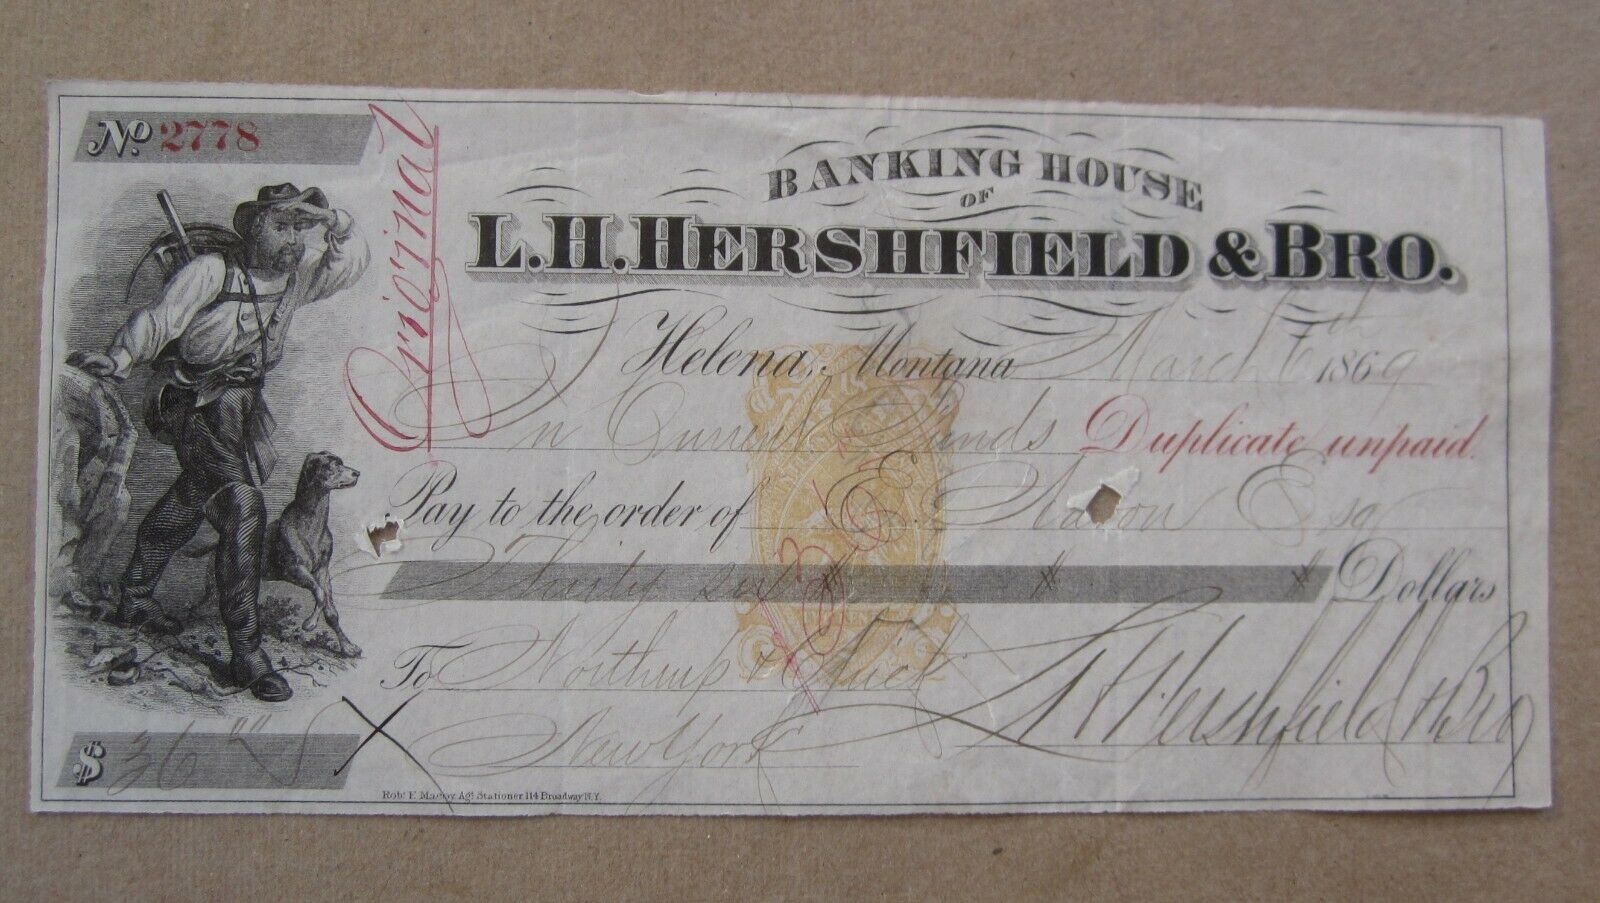 Old c.1870 .L.H. HERSHFIELD Banking House Check...